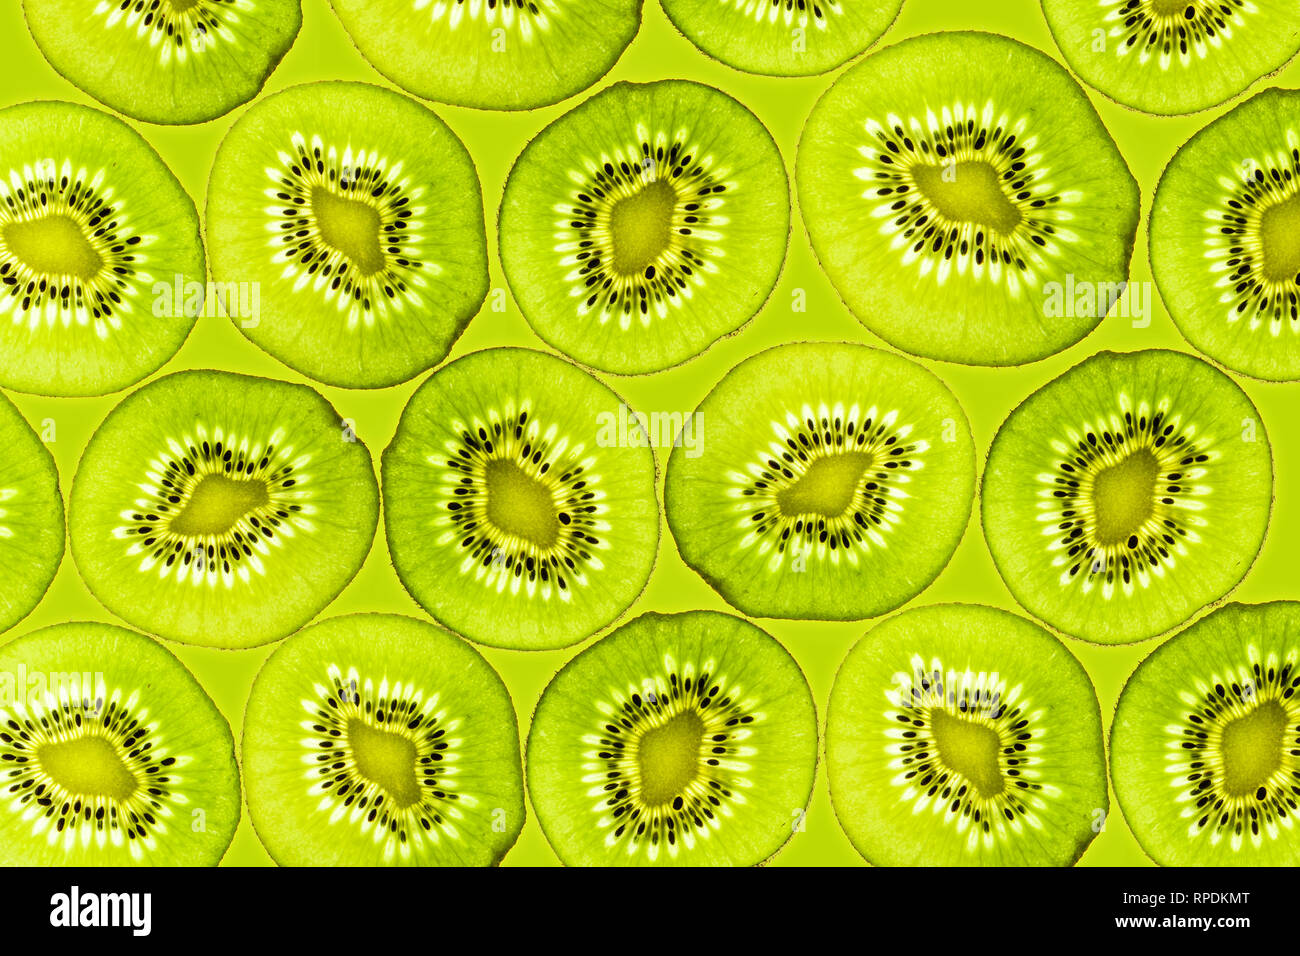 Kiwi slices illuminated from below Background Fruits Top view Stock Photo